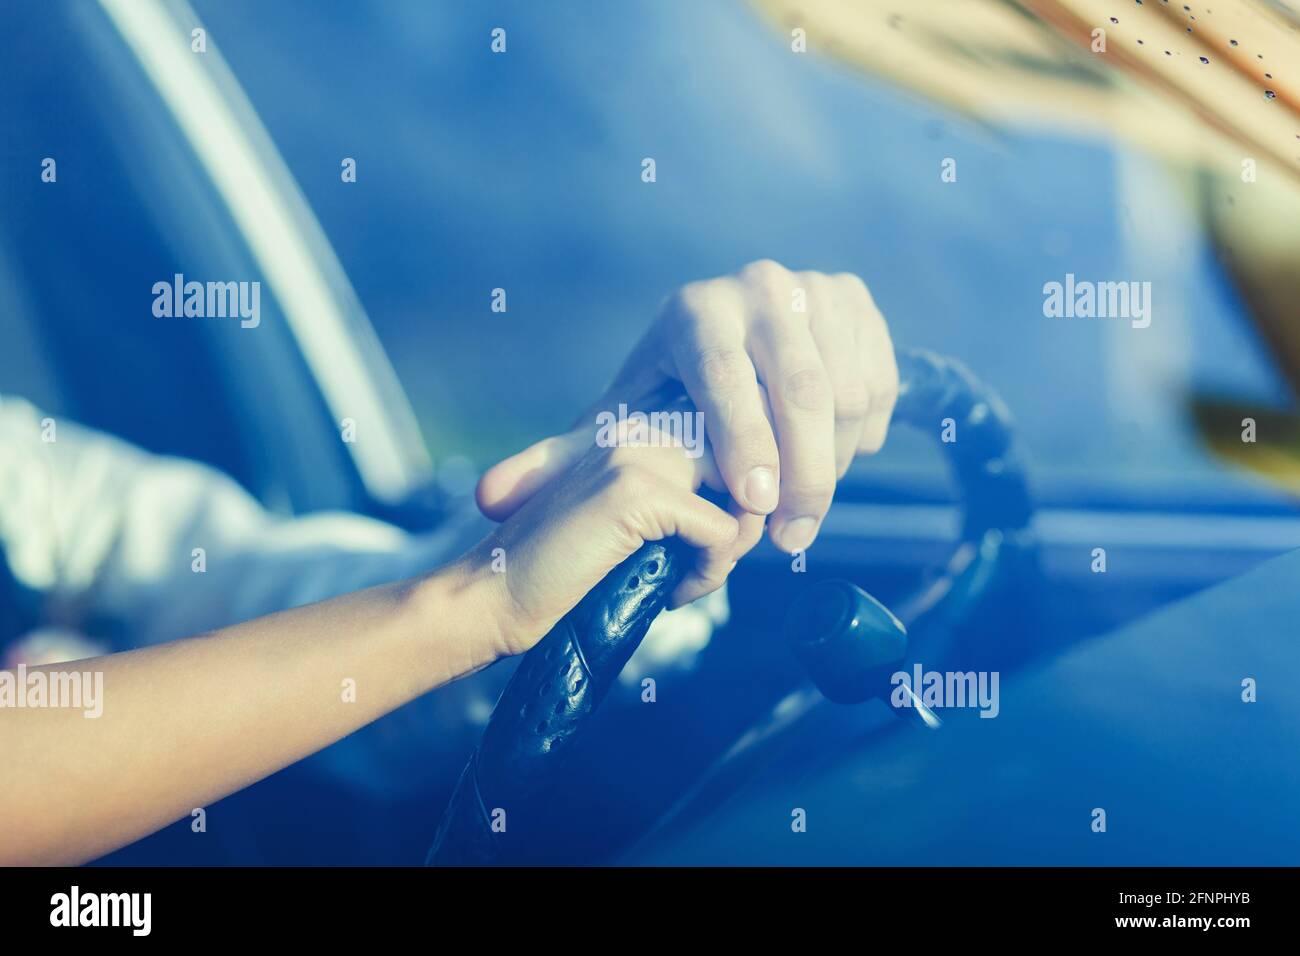 Bride's hand and the hand of the groom on car or automobile. True affection. Close up view. Stock Photo